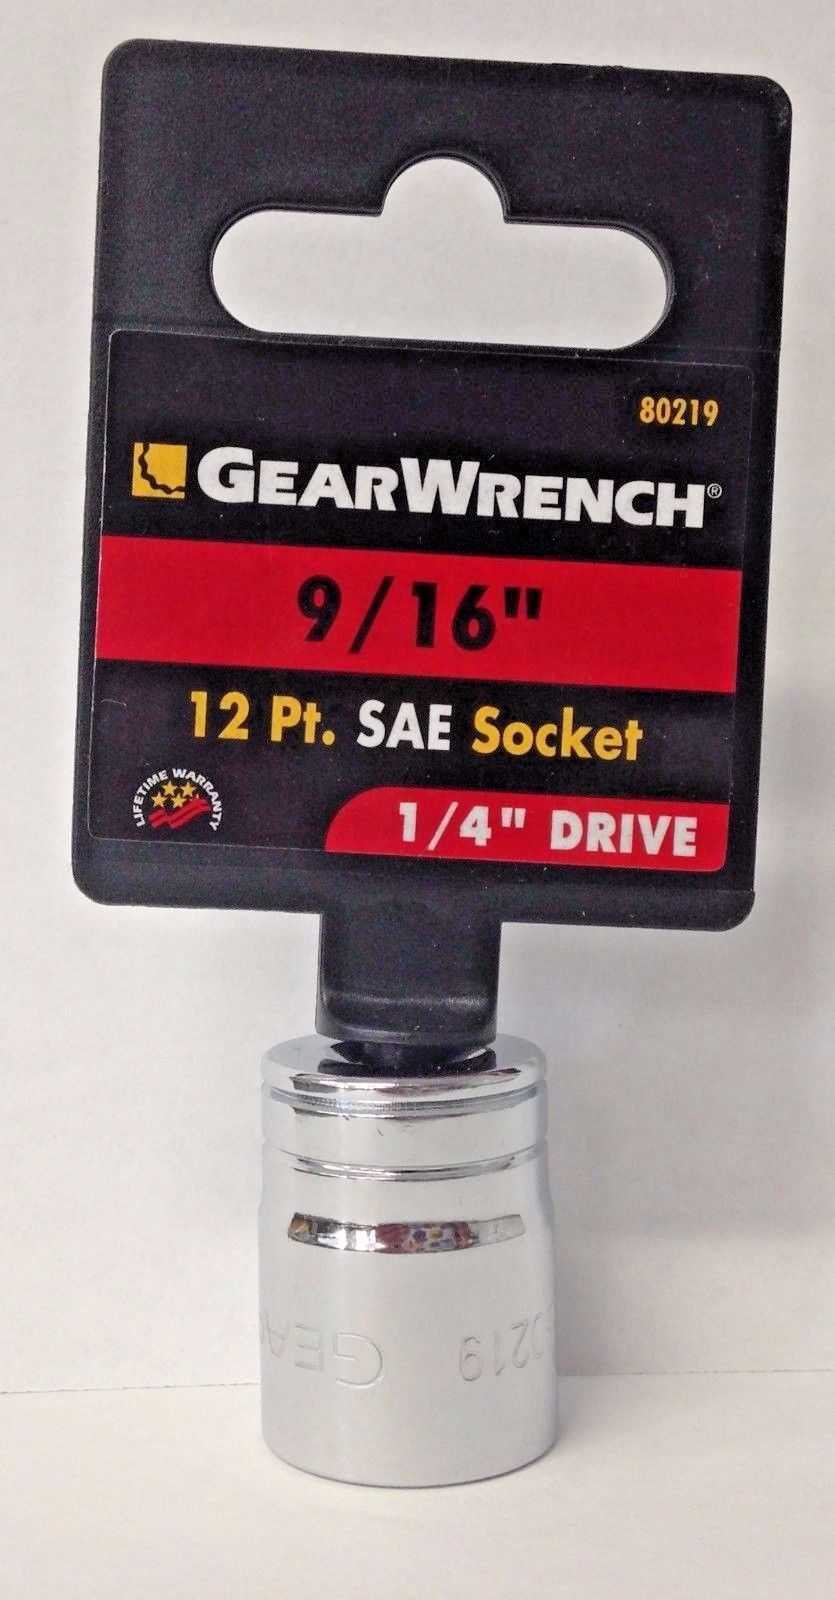 GearWrench 80219 1/4" Drive 12 Point Standard SAE Socket 9/16"